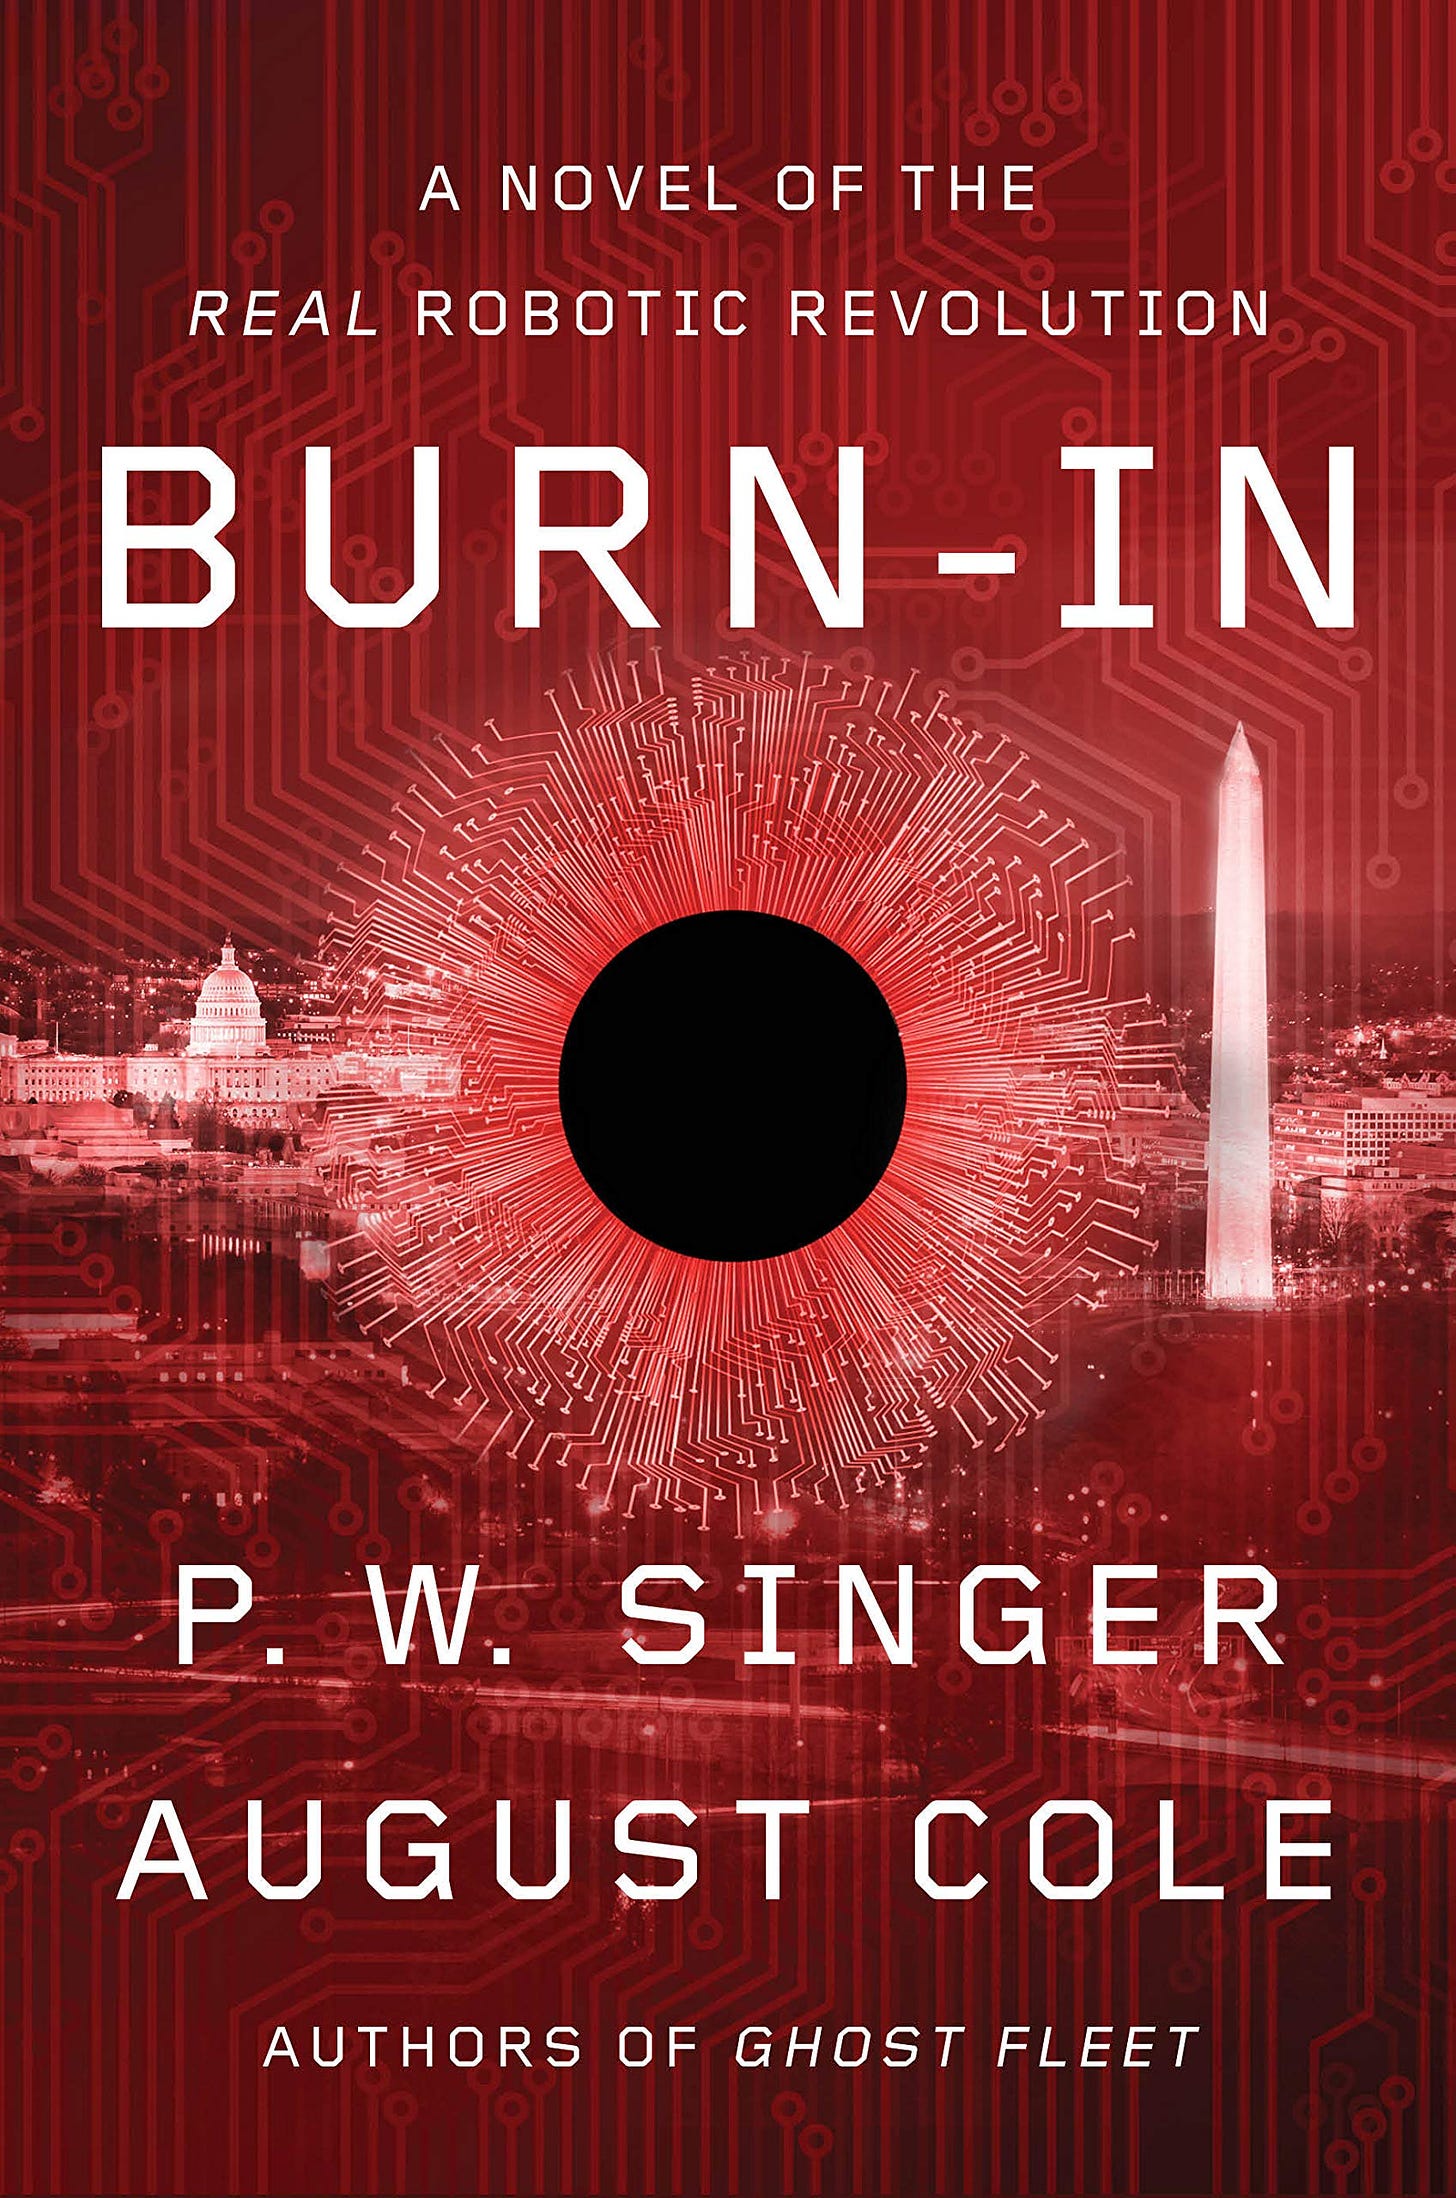 Amazon.com: Burn-In: A Novel of the Real Robotic Revolution ...